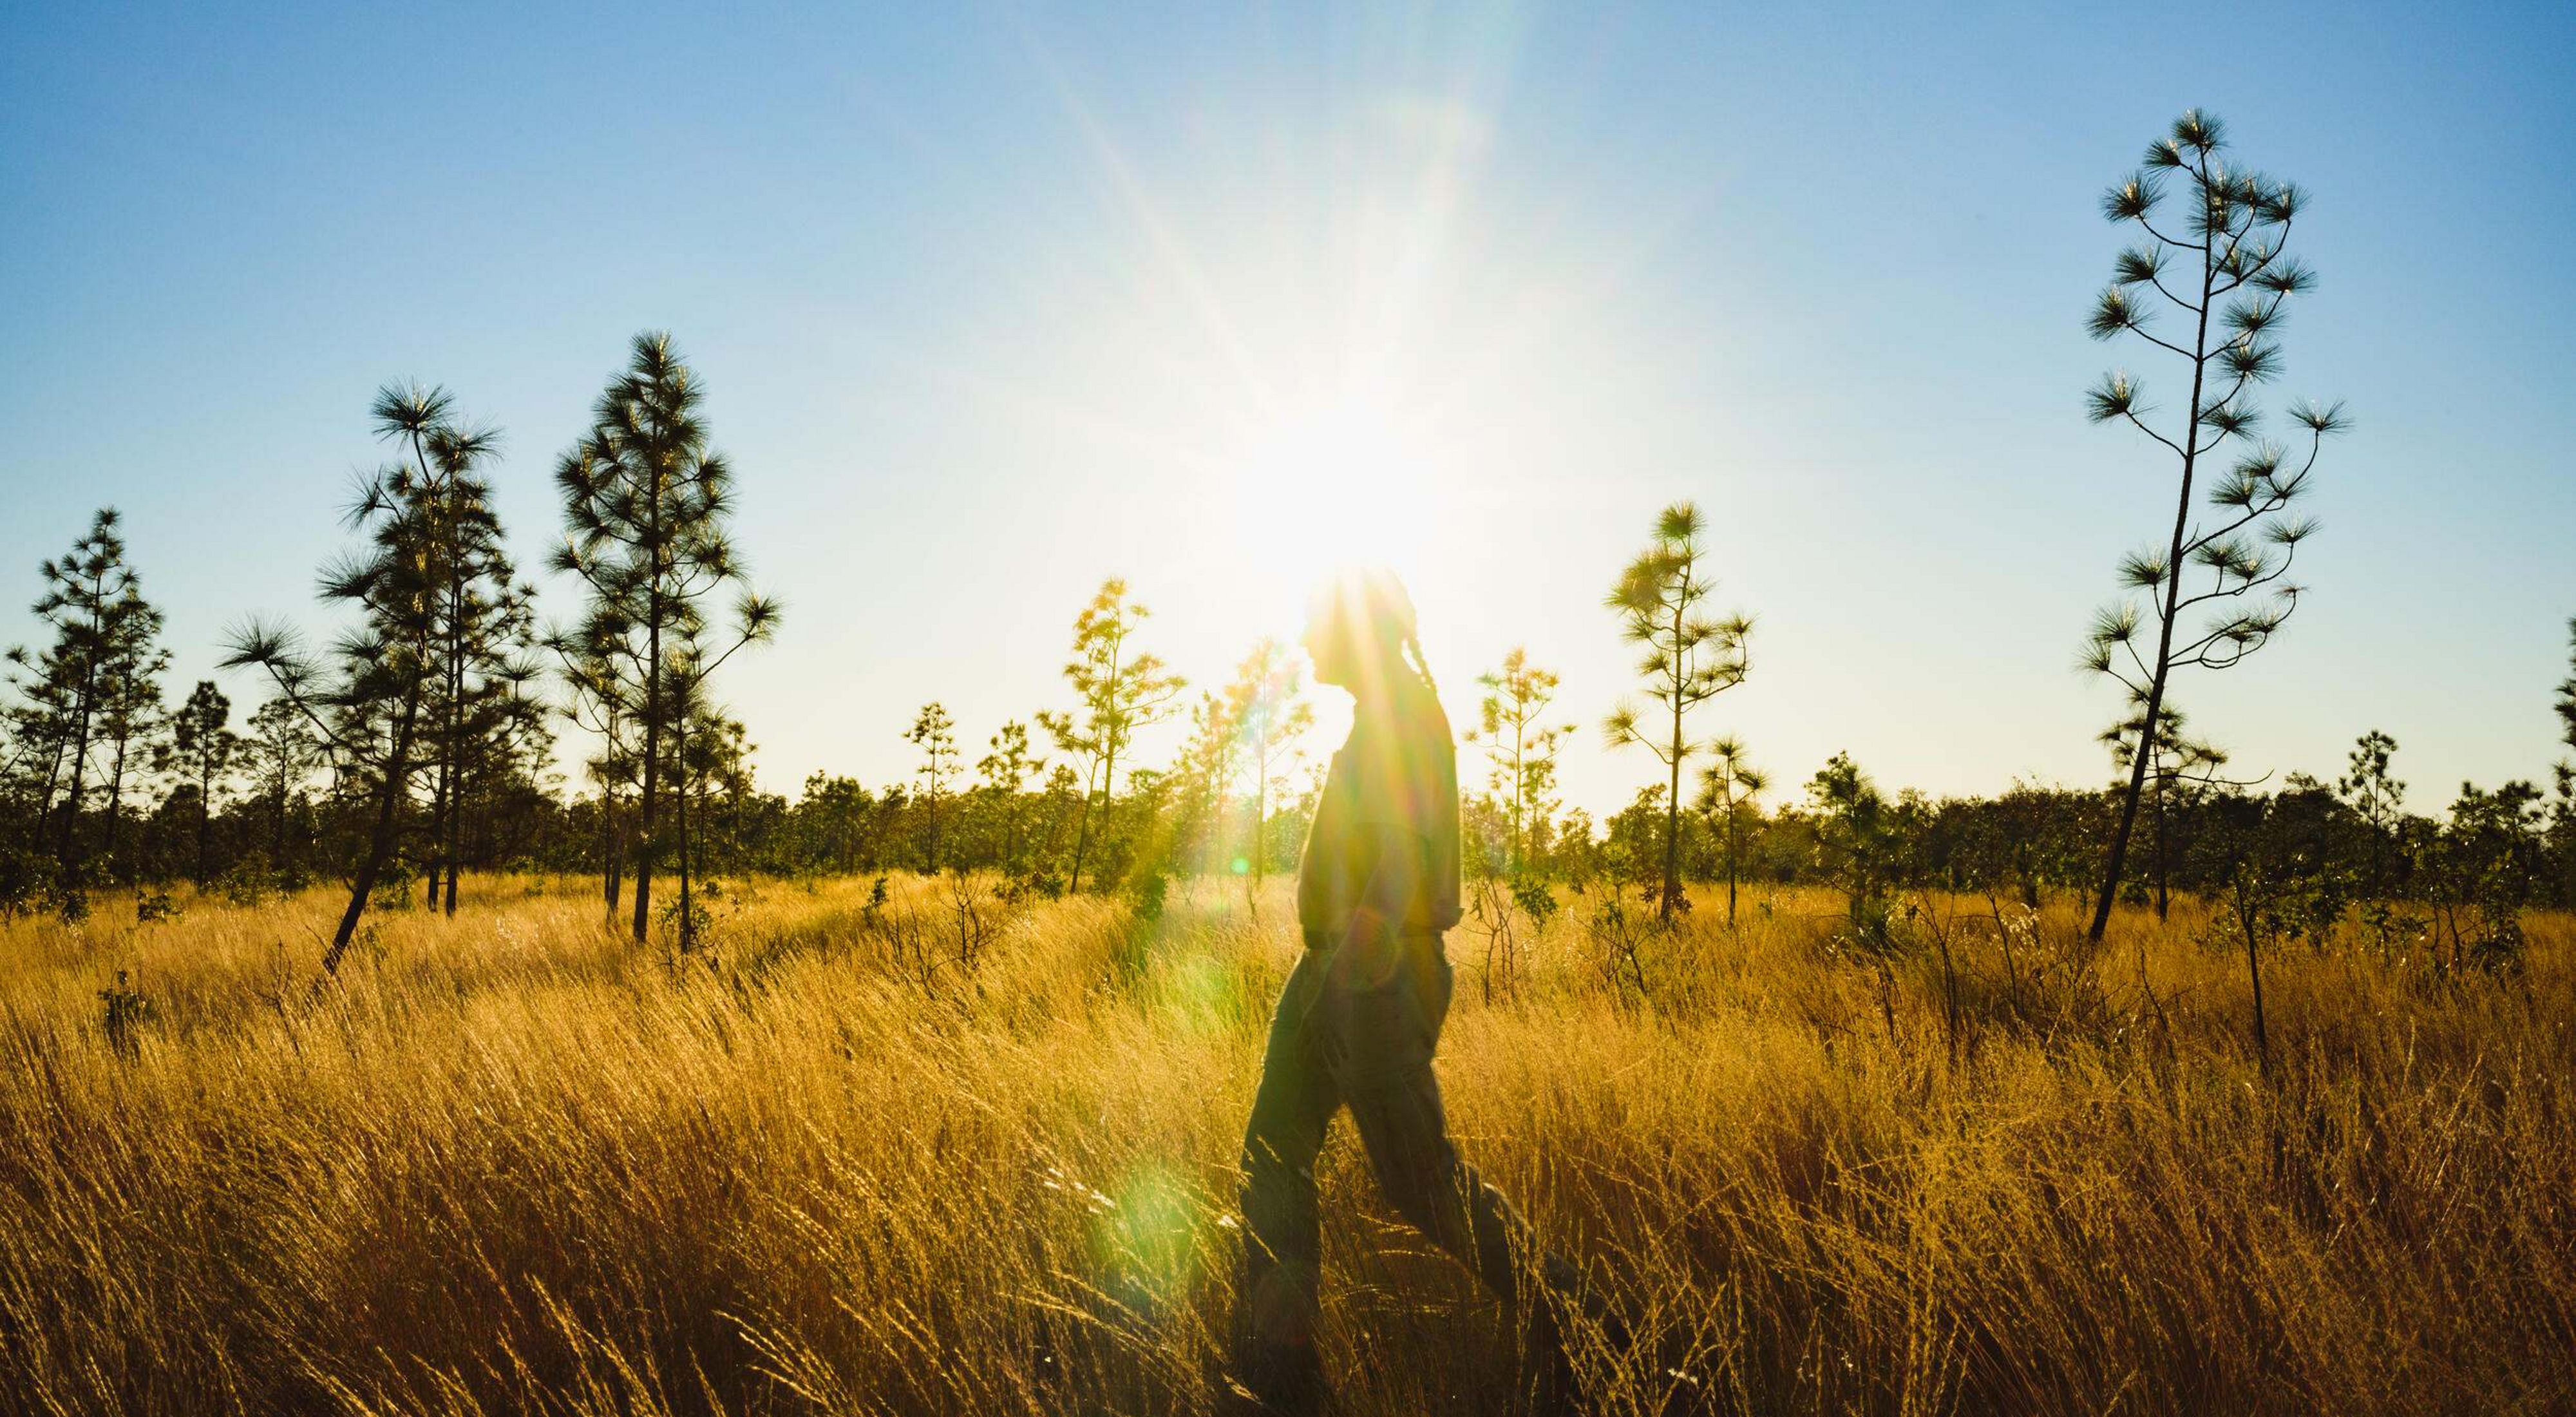 A person walking through a meadow interspersed with pine trees backlit by the sun.